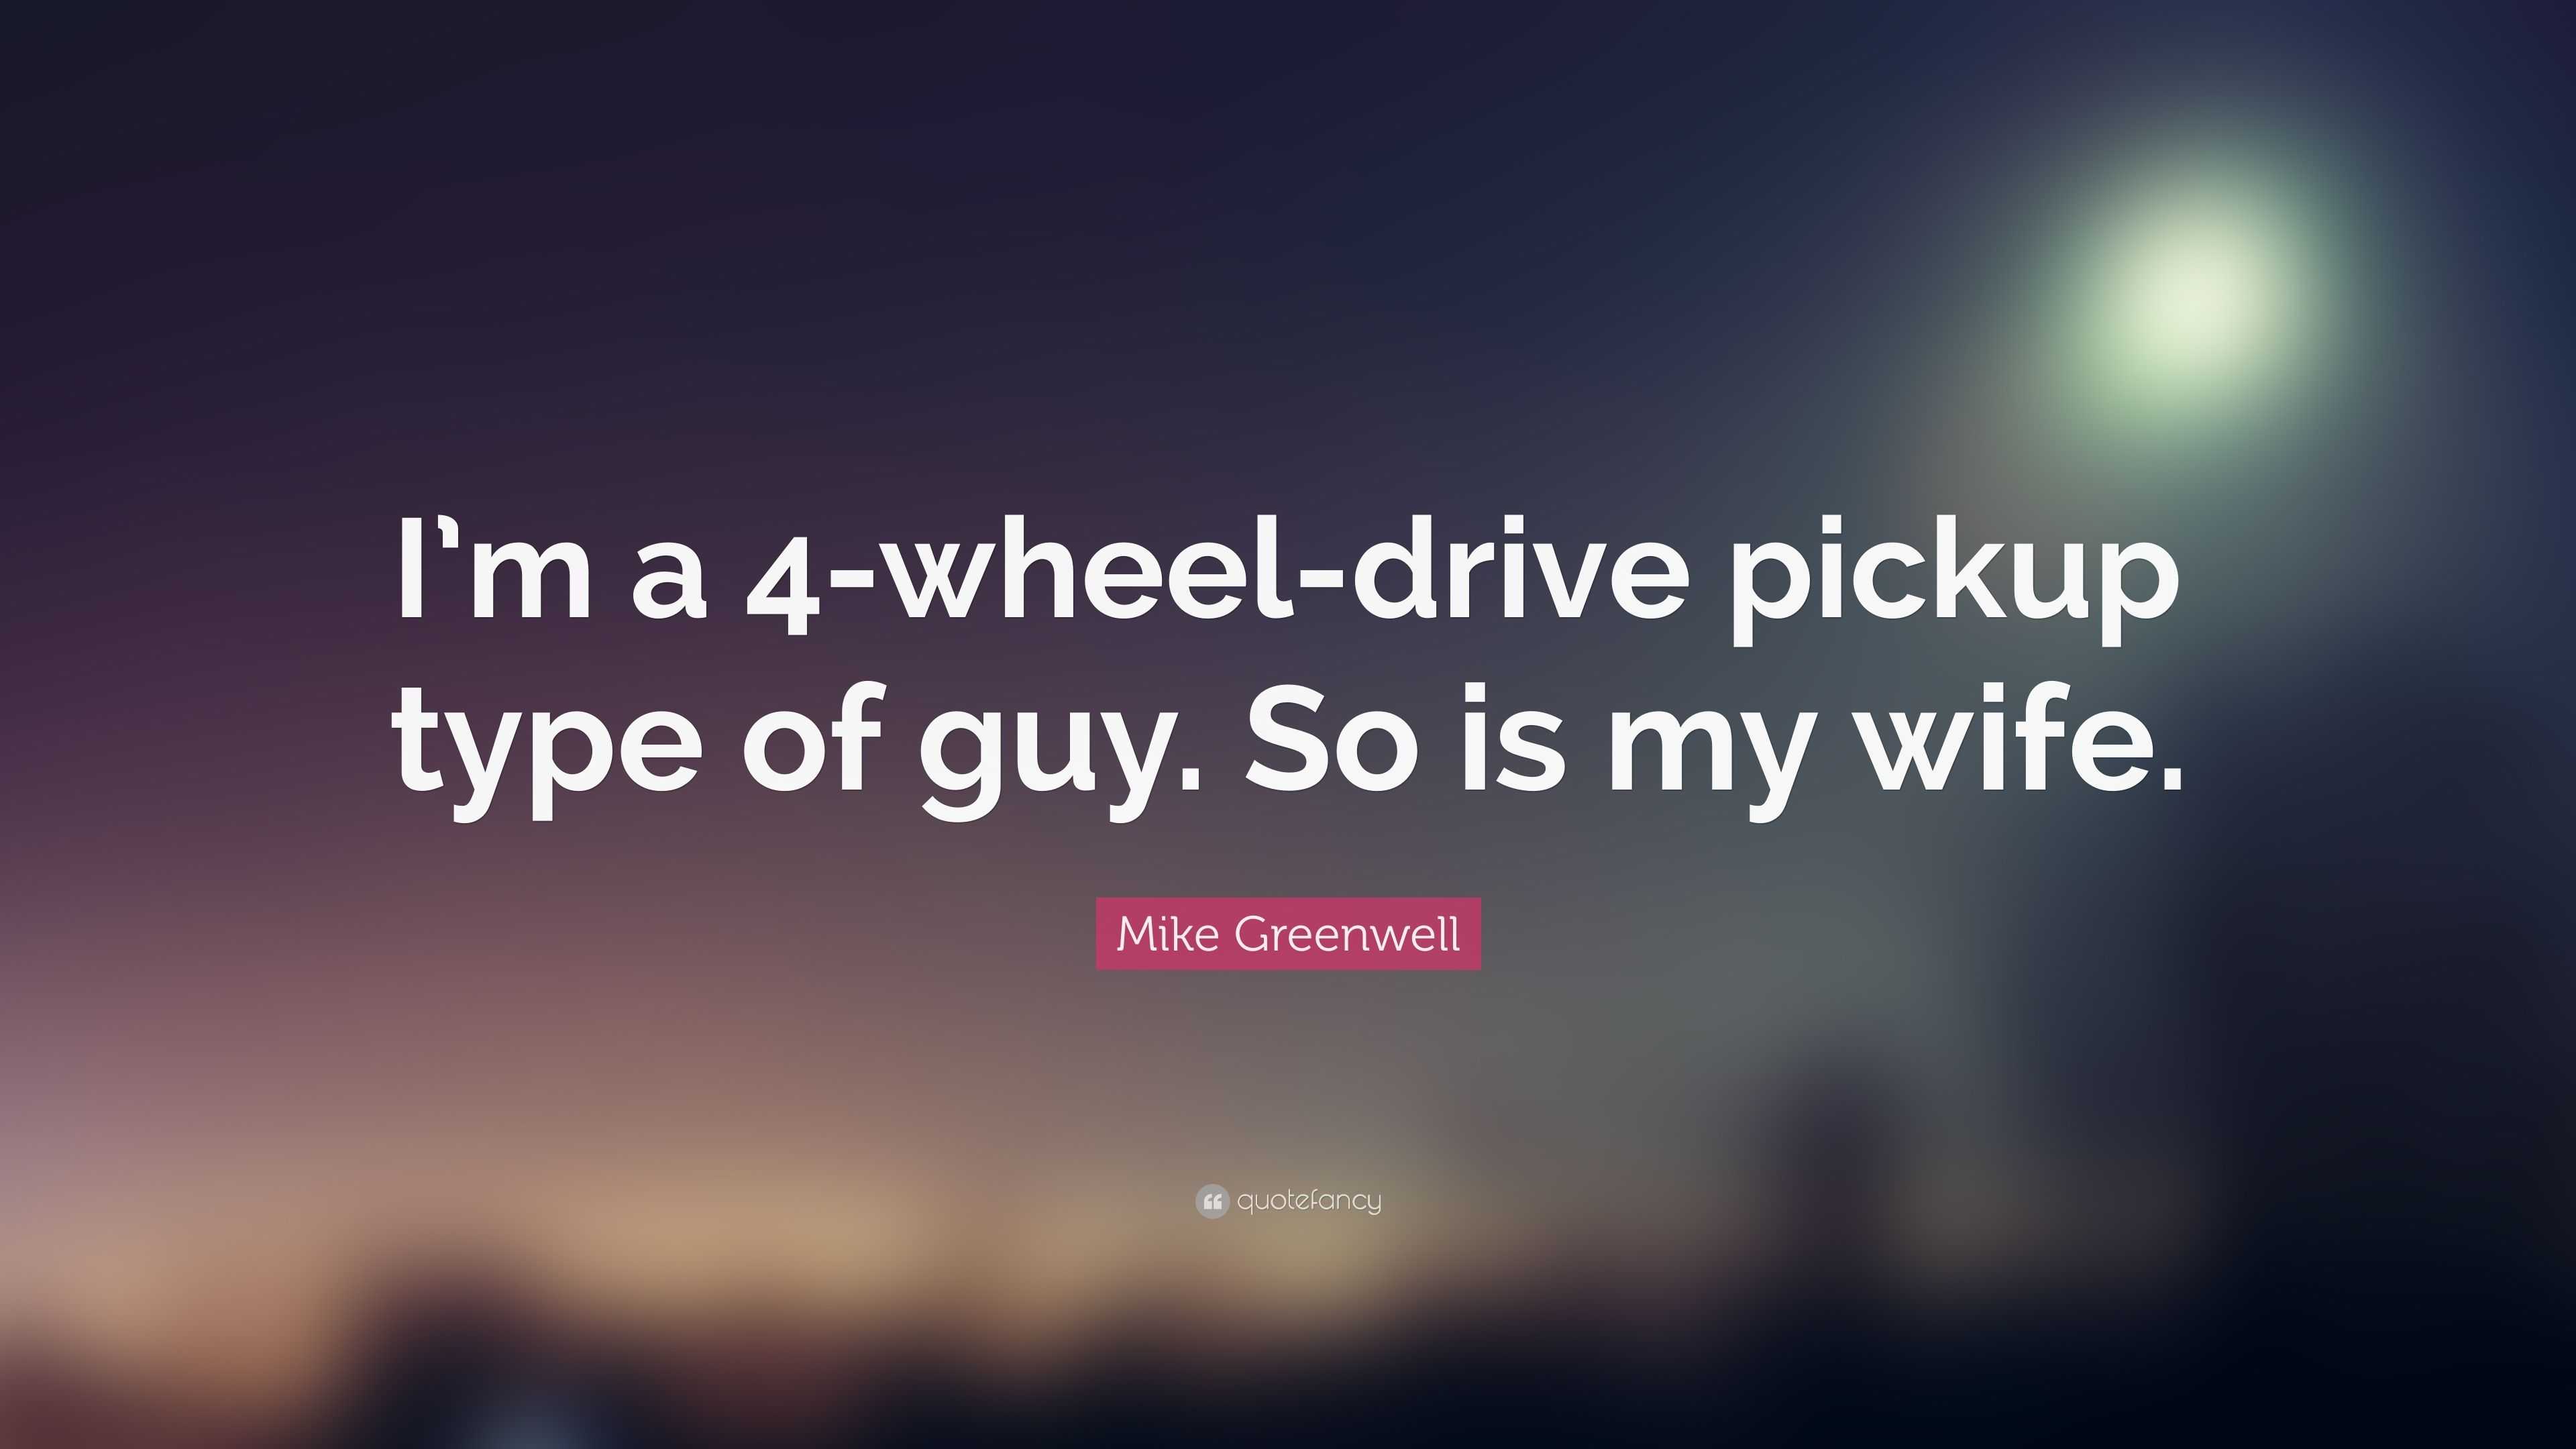 Mike Greenwell Quote: “I'm a 4-wheel-drive pickup type of guy. So